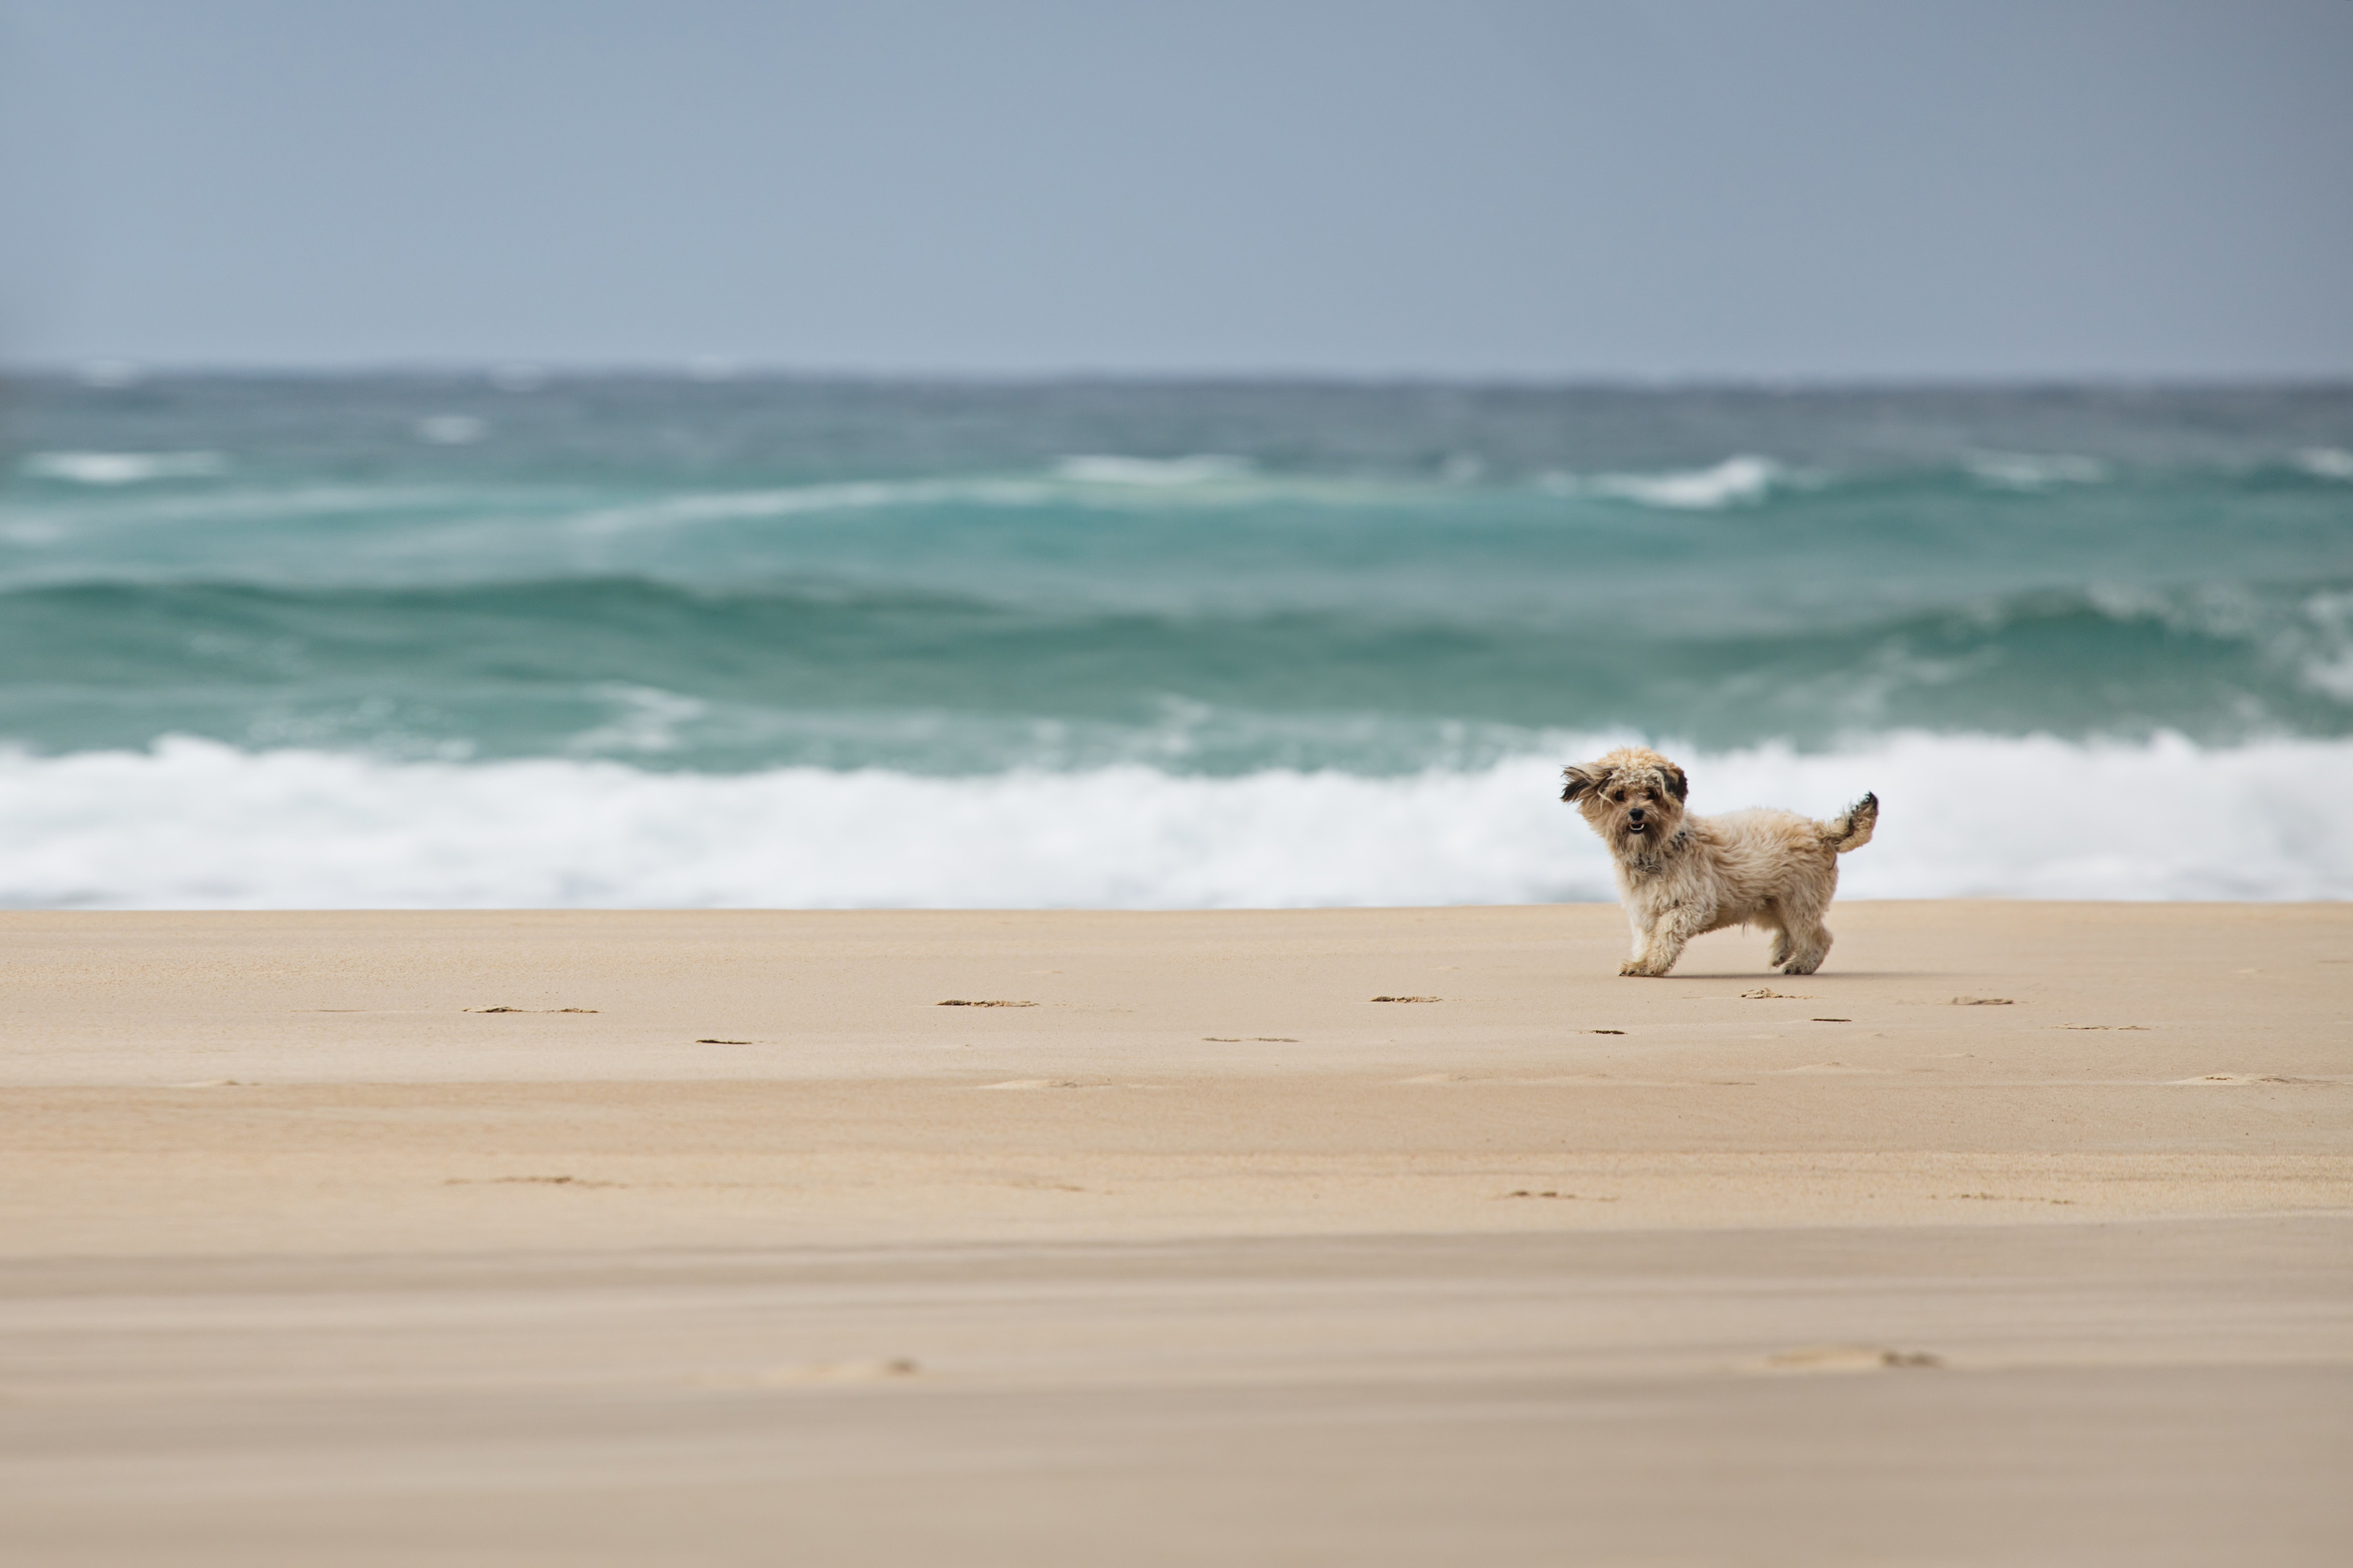 Dogs On Beach Wallpapers High Quality | Download Free